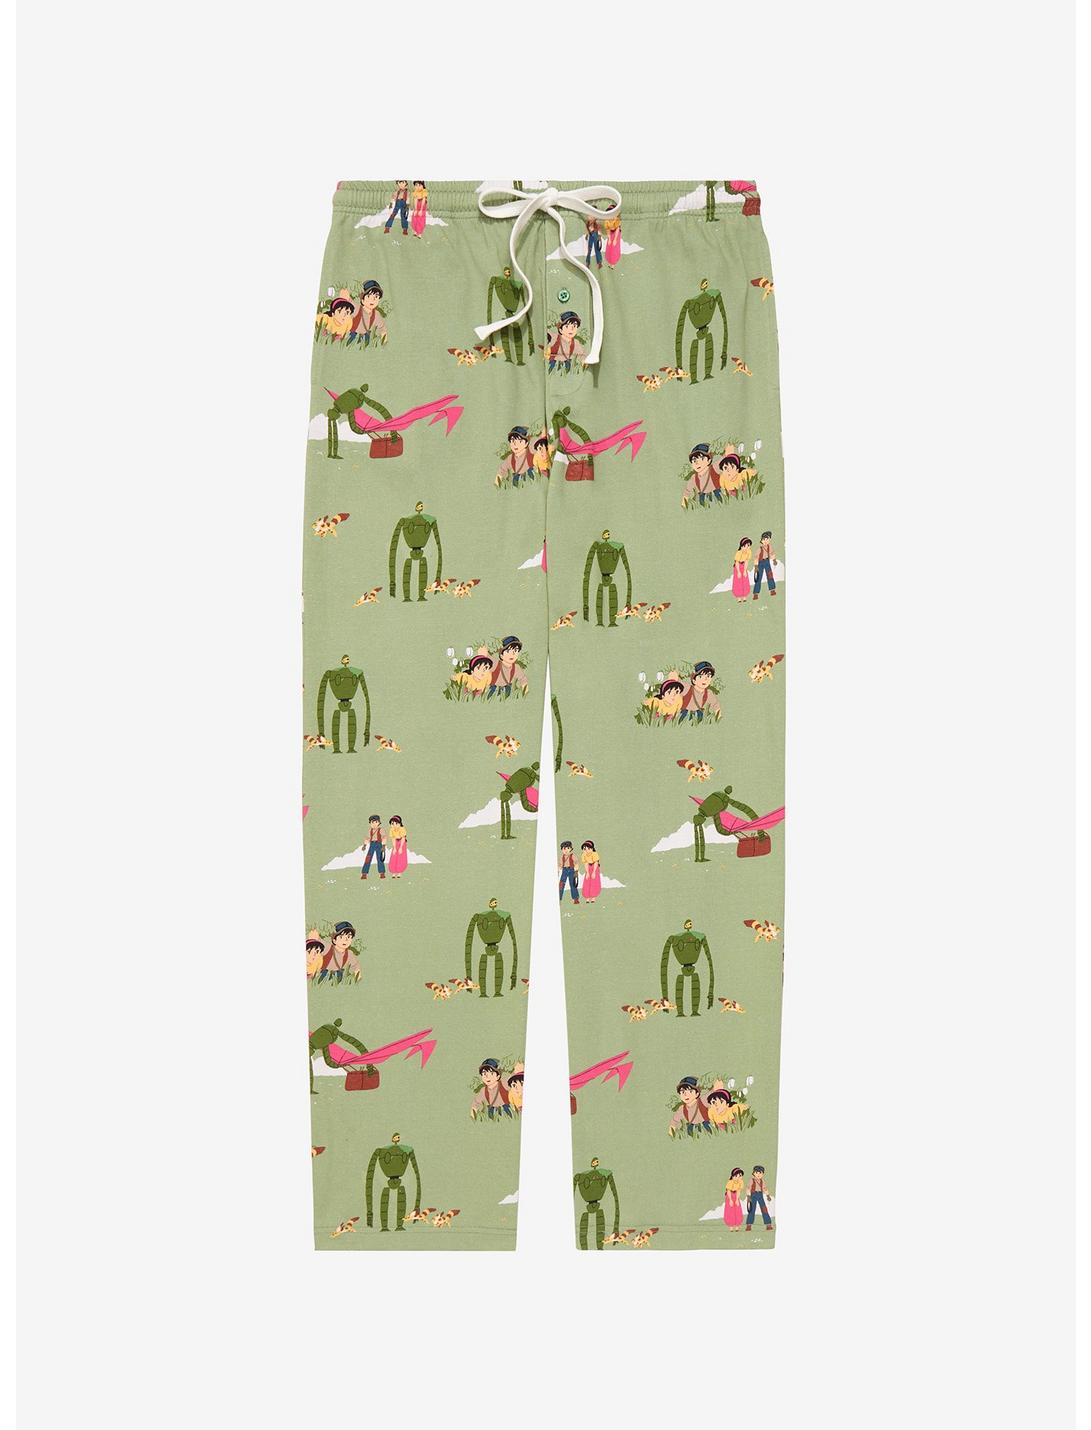 Studio Ghibli Castle in the Sky Characters Allover Print Sleep Pants - BoxLunch Exclusive, SAGE, hi-res